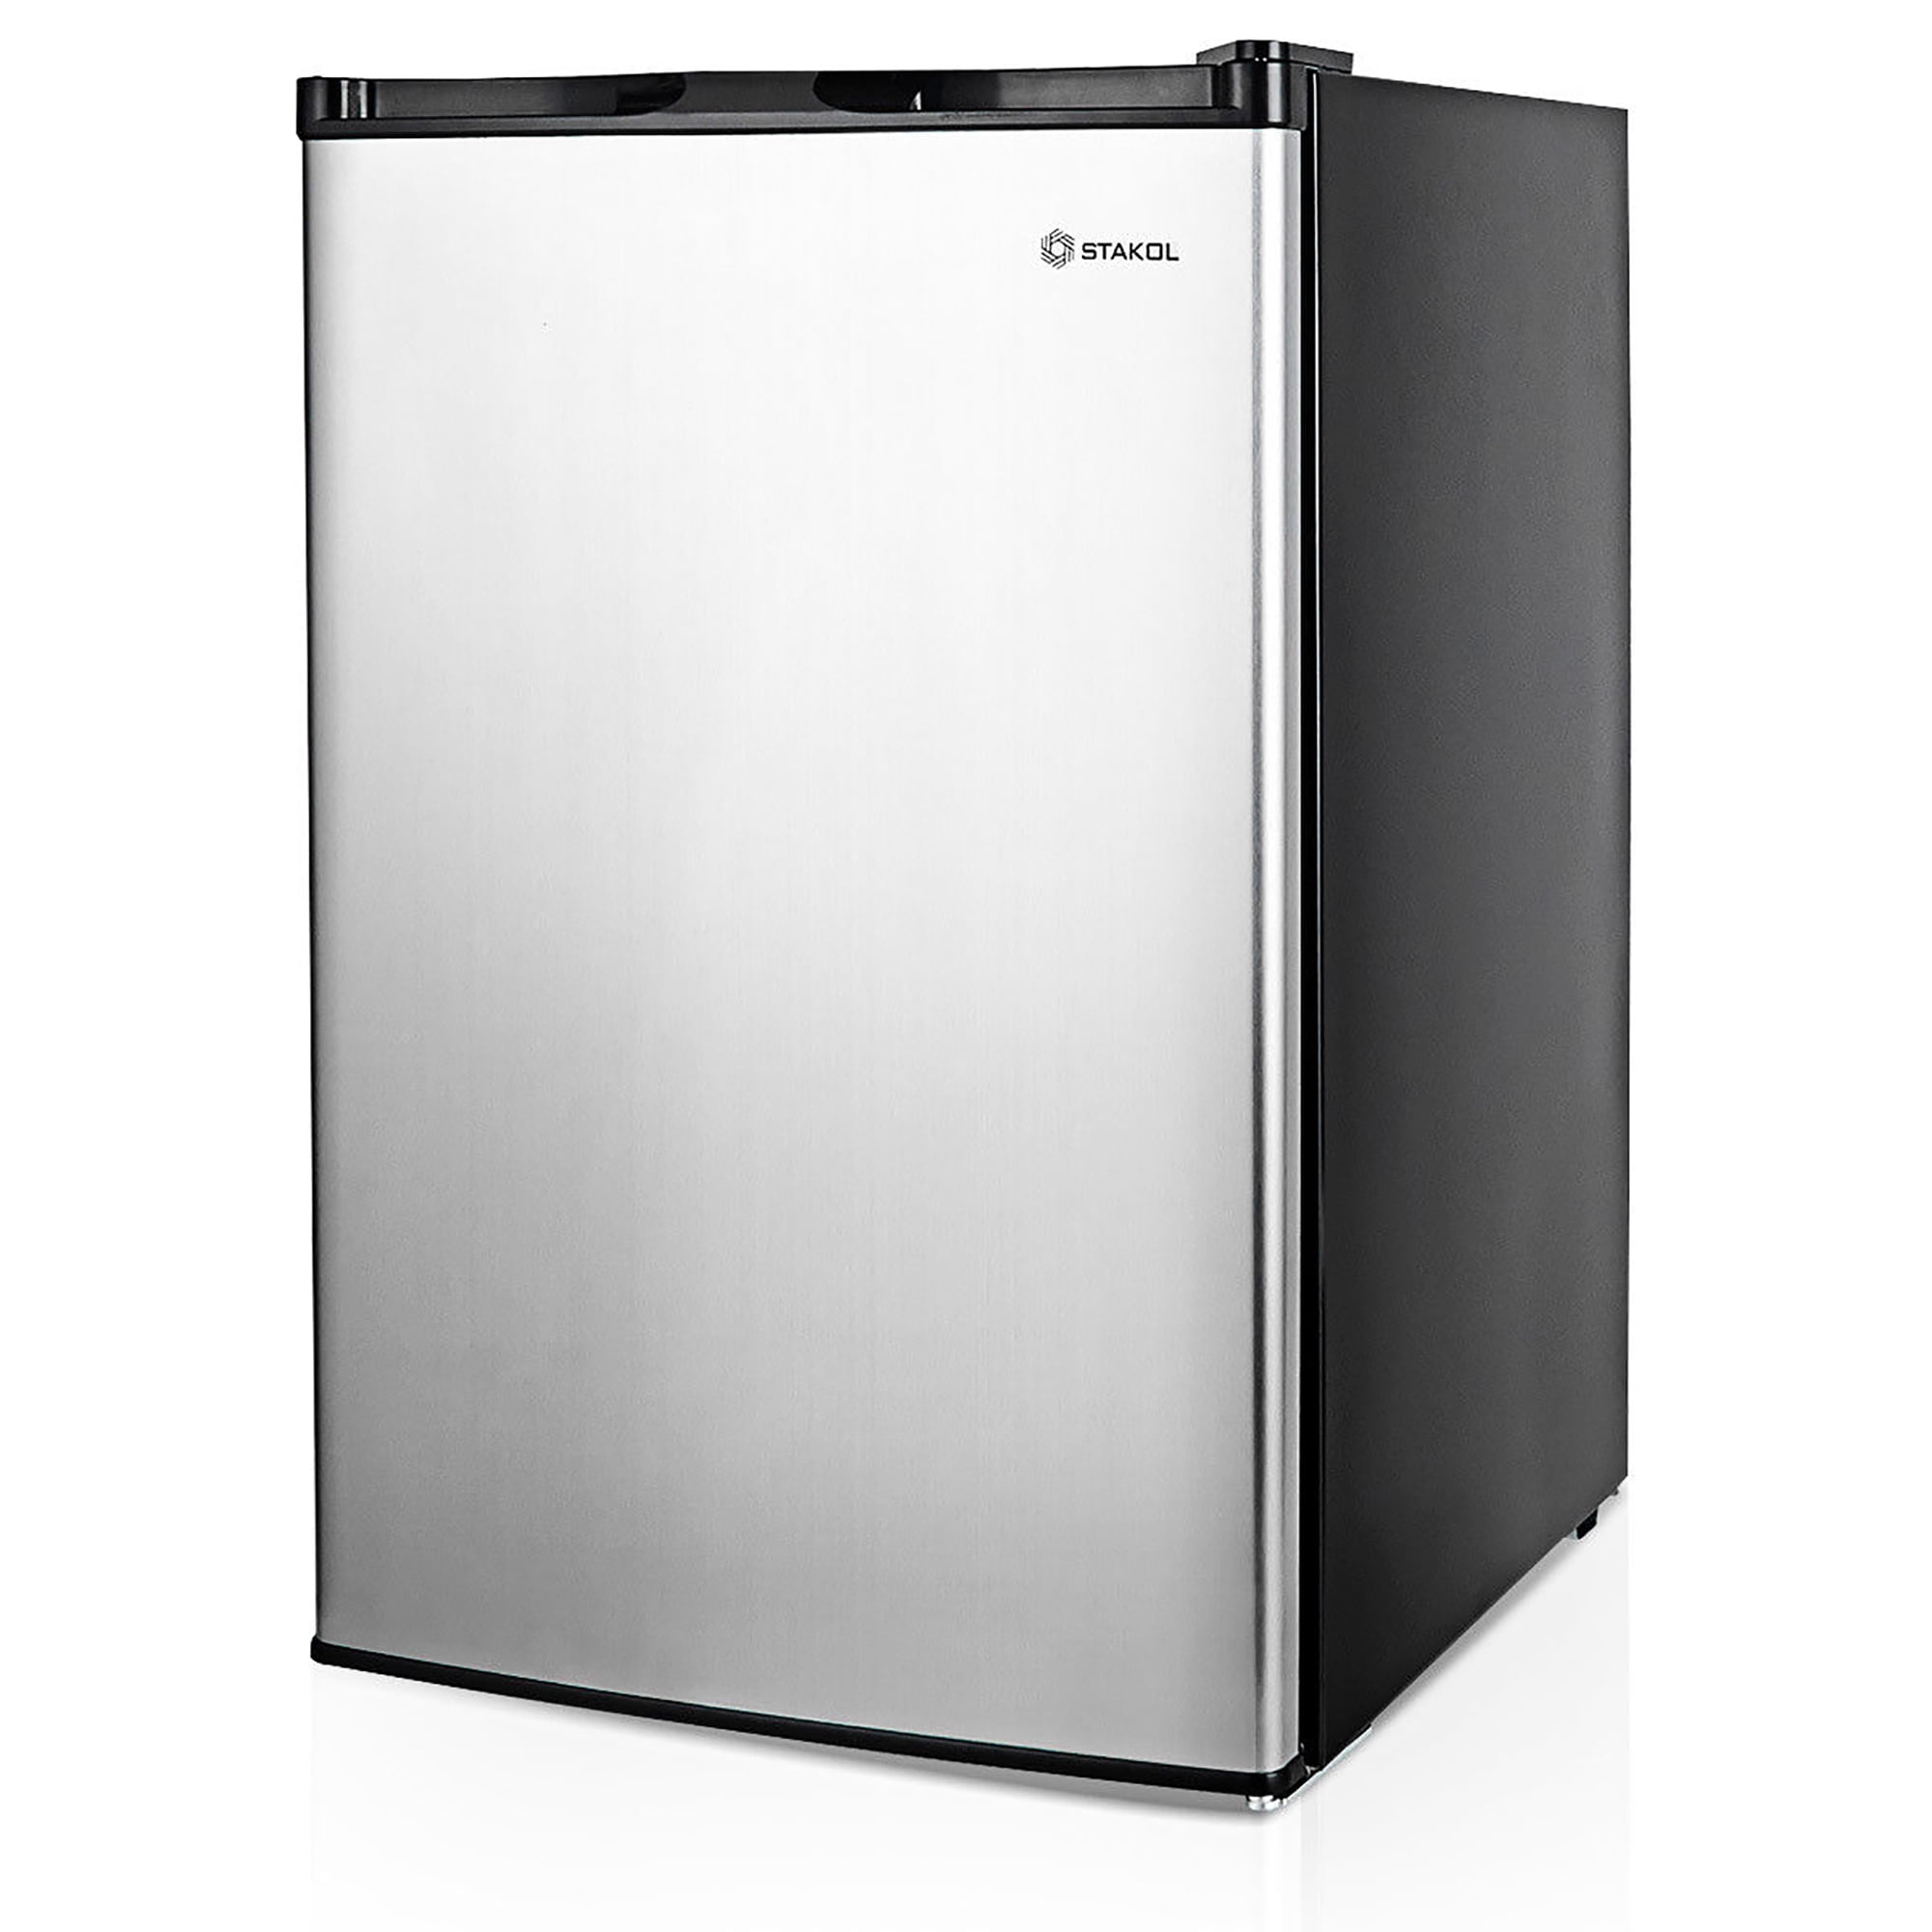 3.0 Cu.Ft Compact Upright Freezer Sale, Price & Reviews - Eletriclife